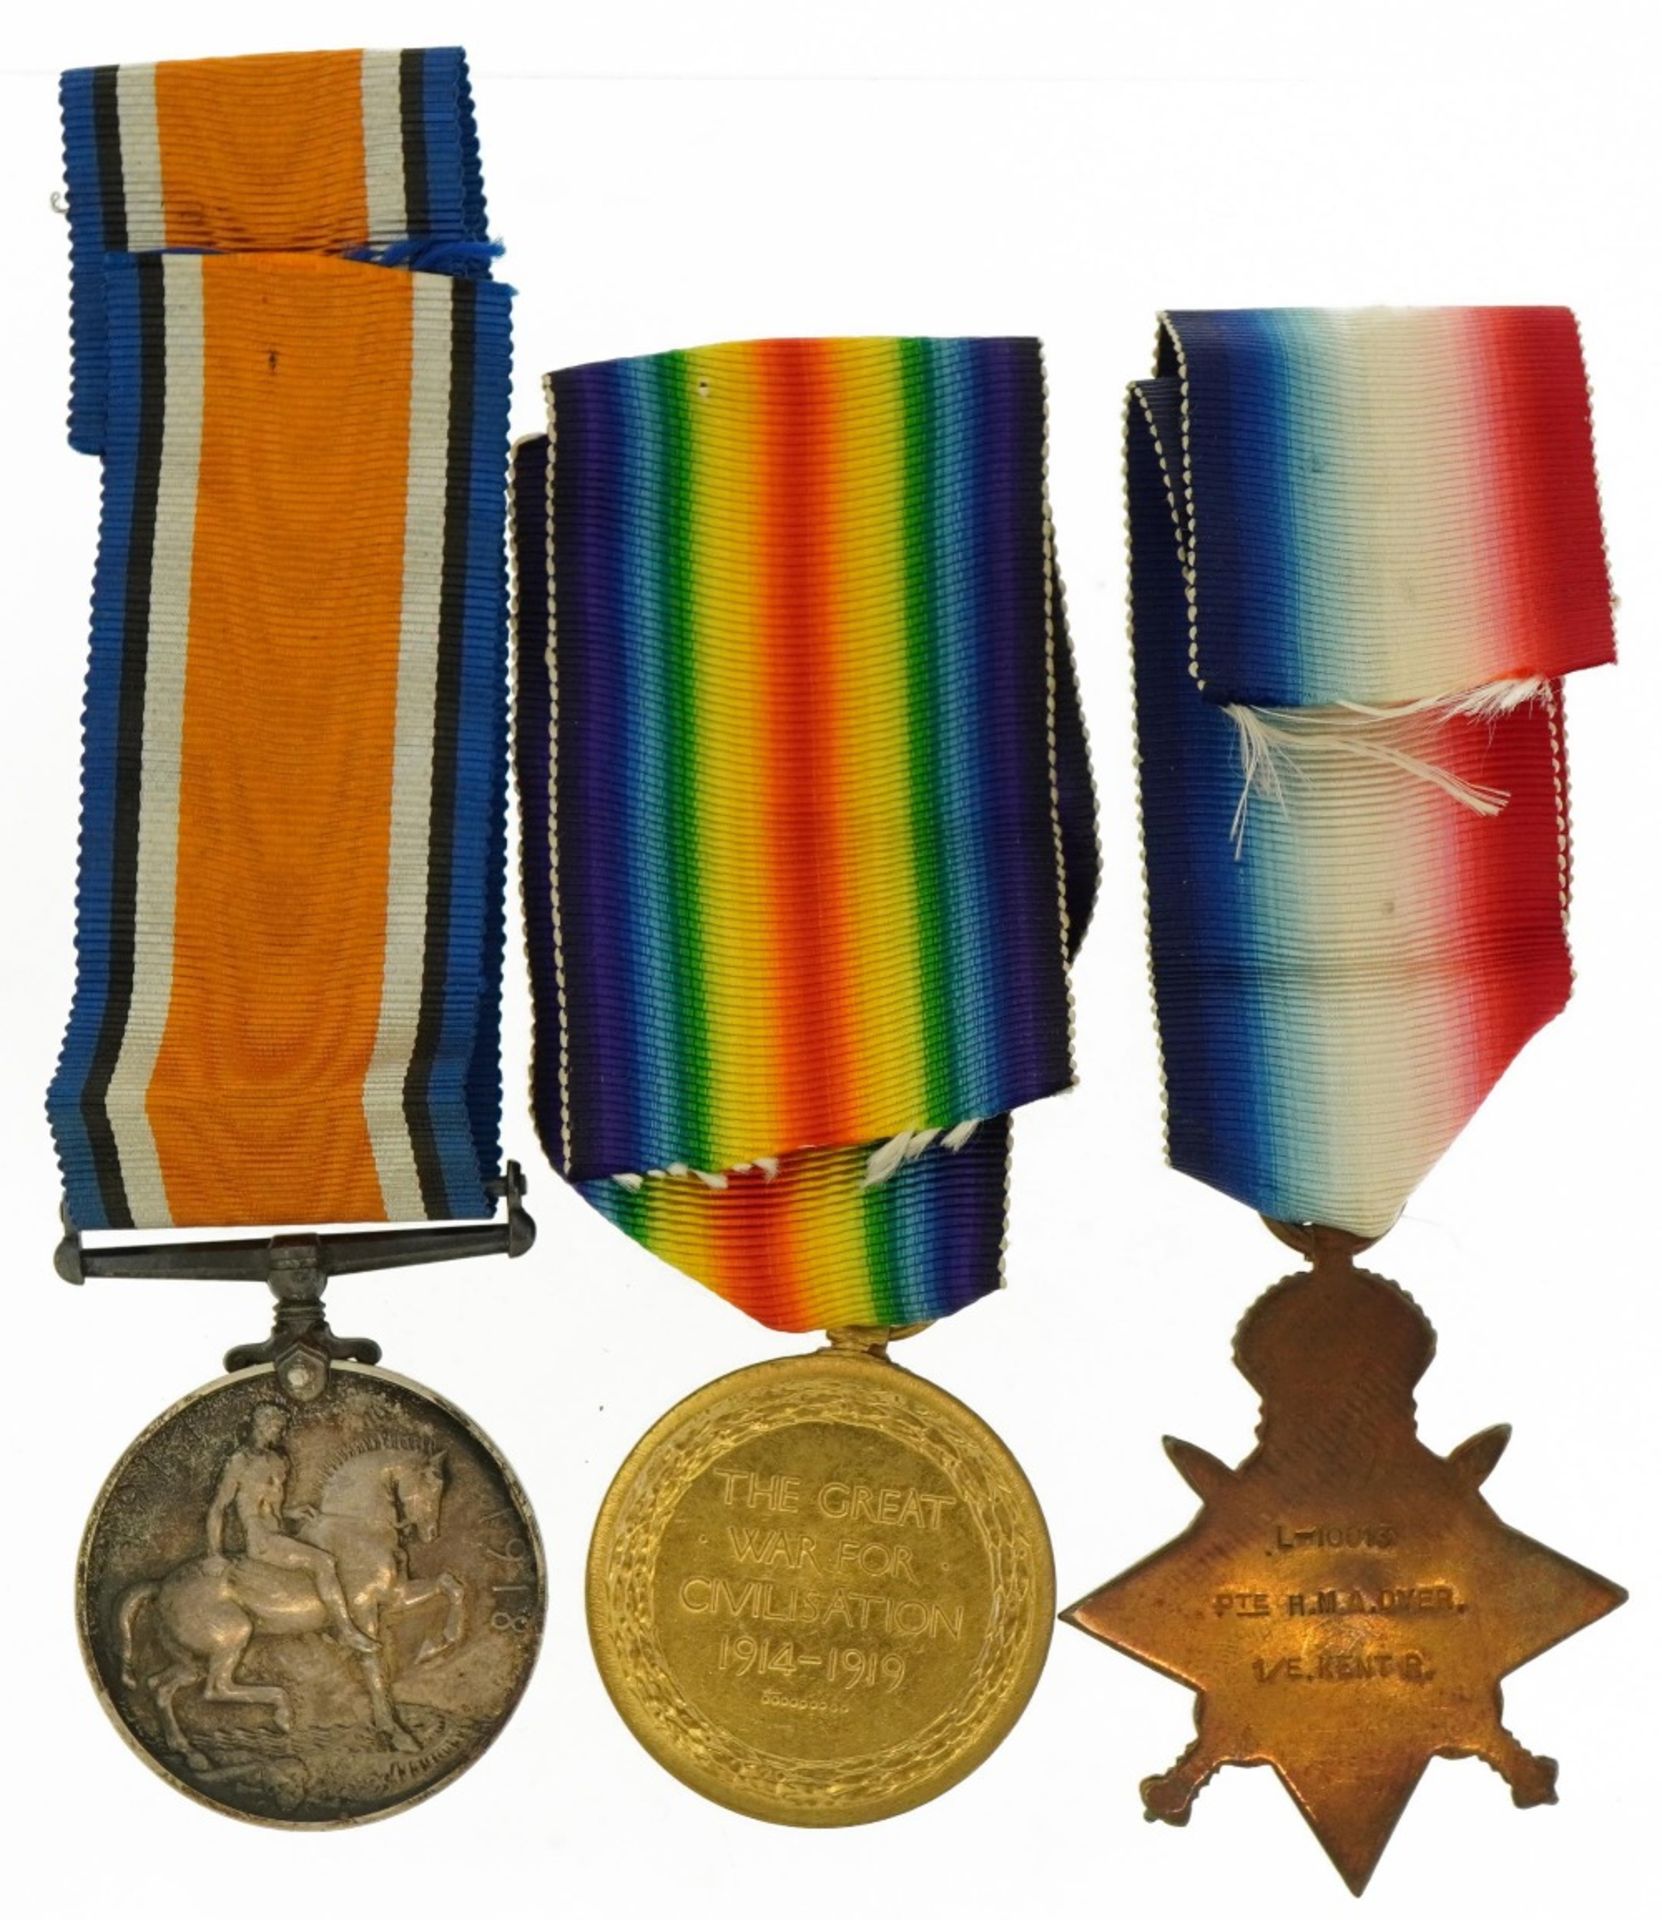 British military World War I trio with Mons star awarded to L-10013PTE.H.M.A.DYER.E.KENTR., - Image 3 of 7